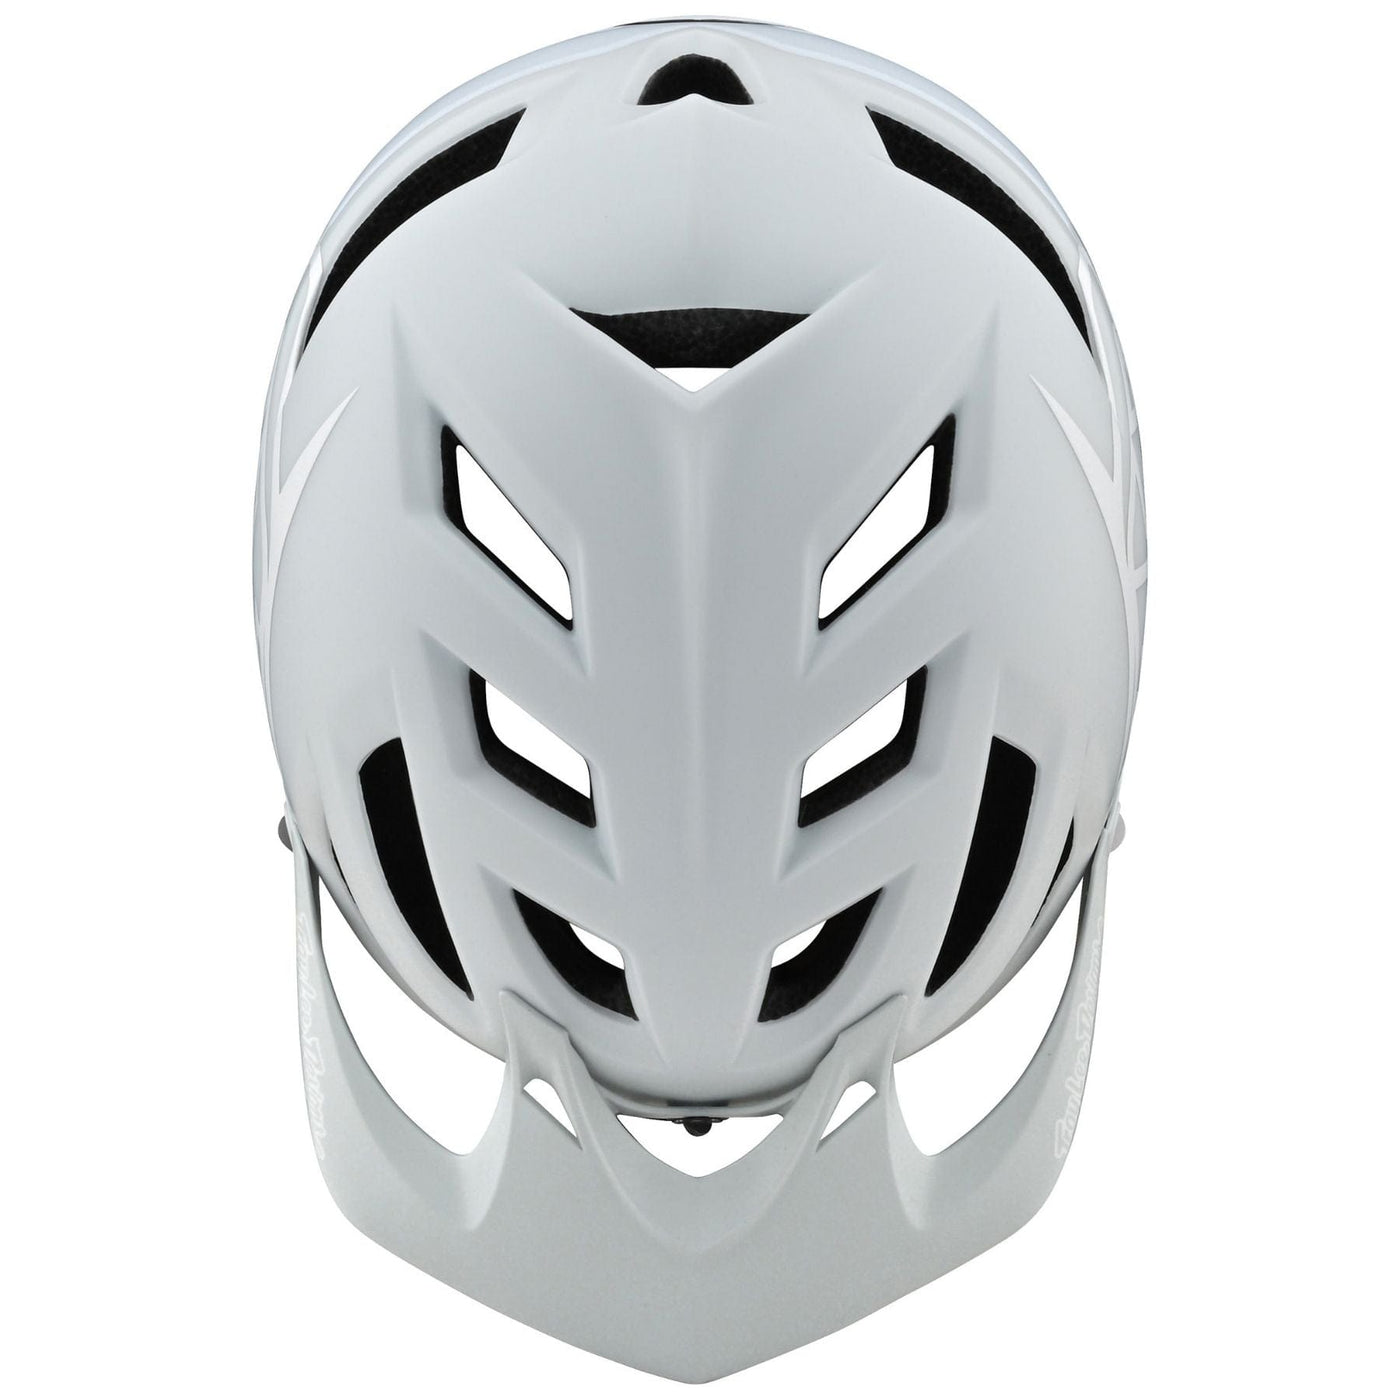 Troy Lee Designs A1 MIPS Bike Helmet - Light Gray/White 8Lines Shop - Fast Shipping